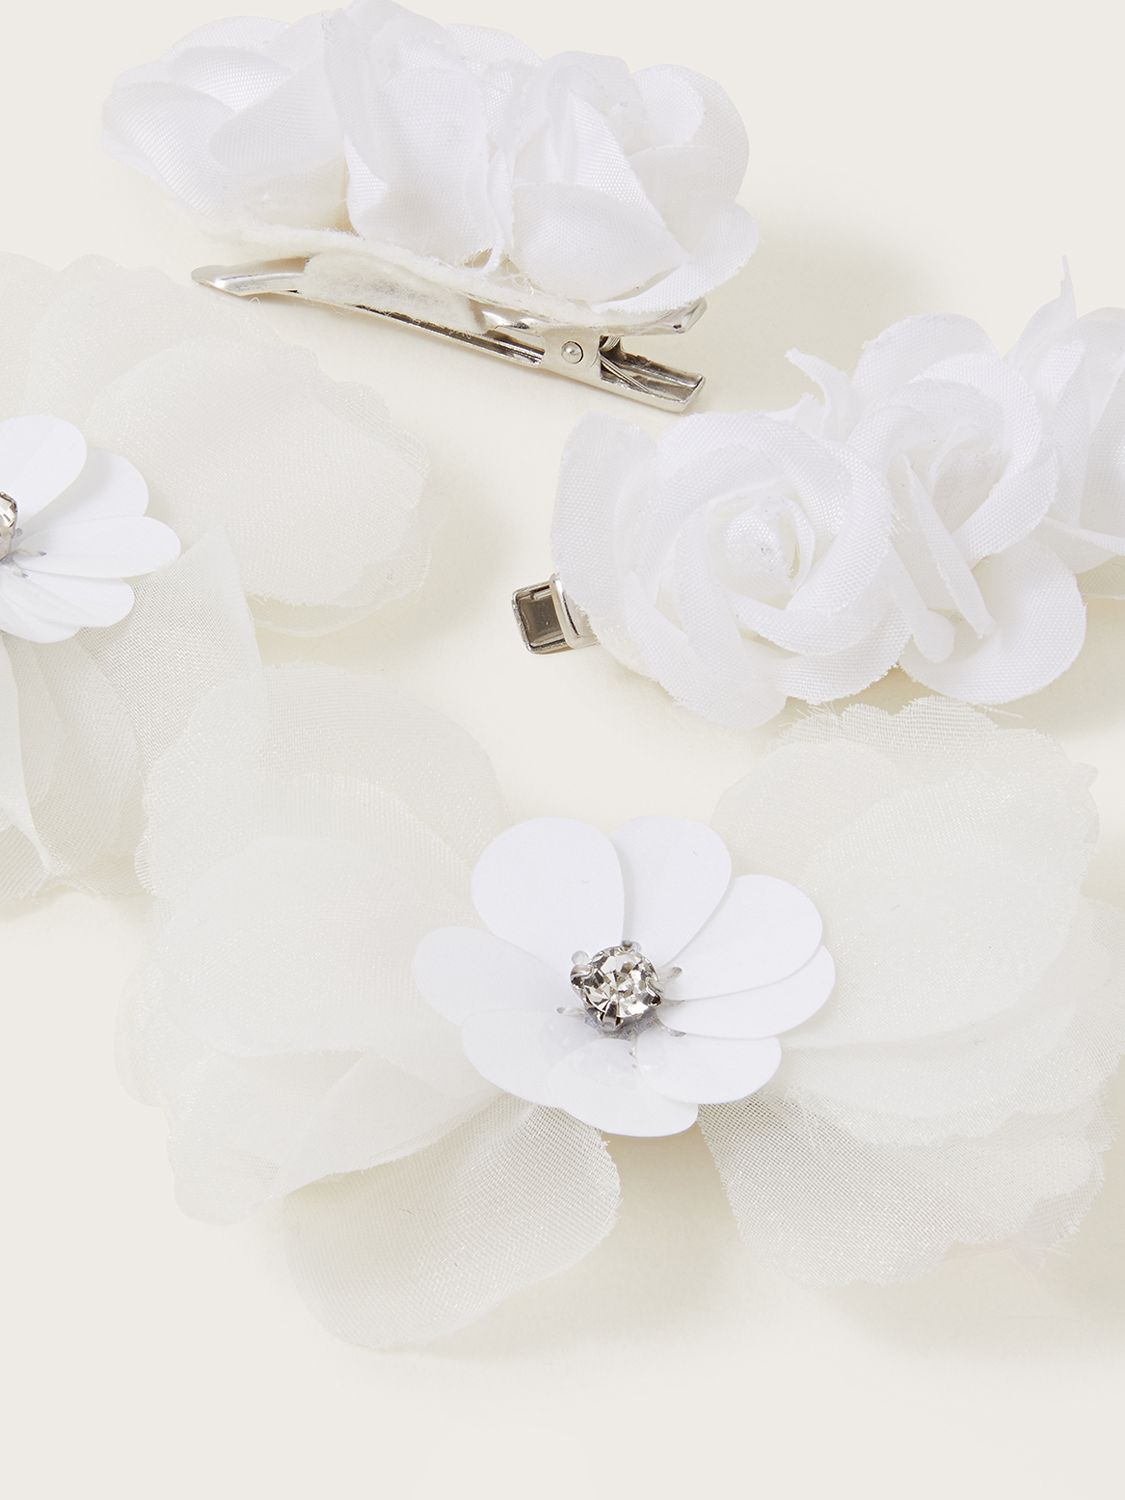 Monsoon Kids' Bridesmaid Hair Clip, Ivory, One Size